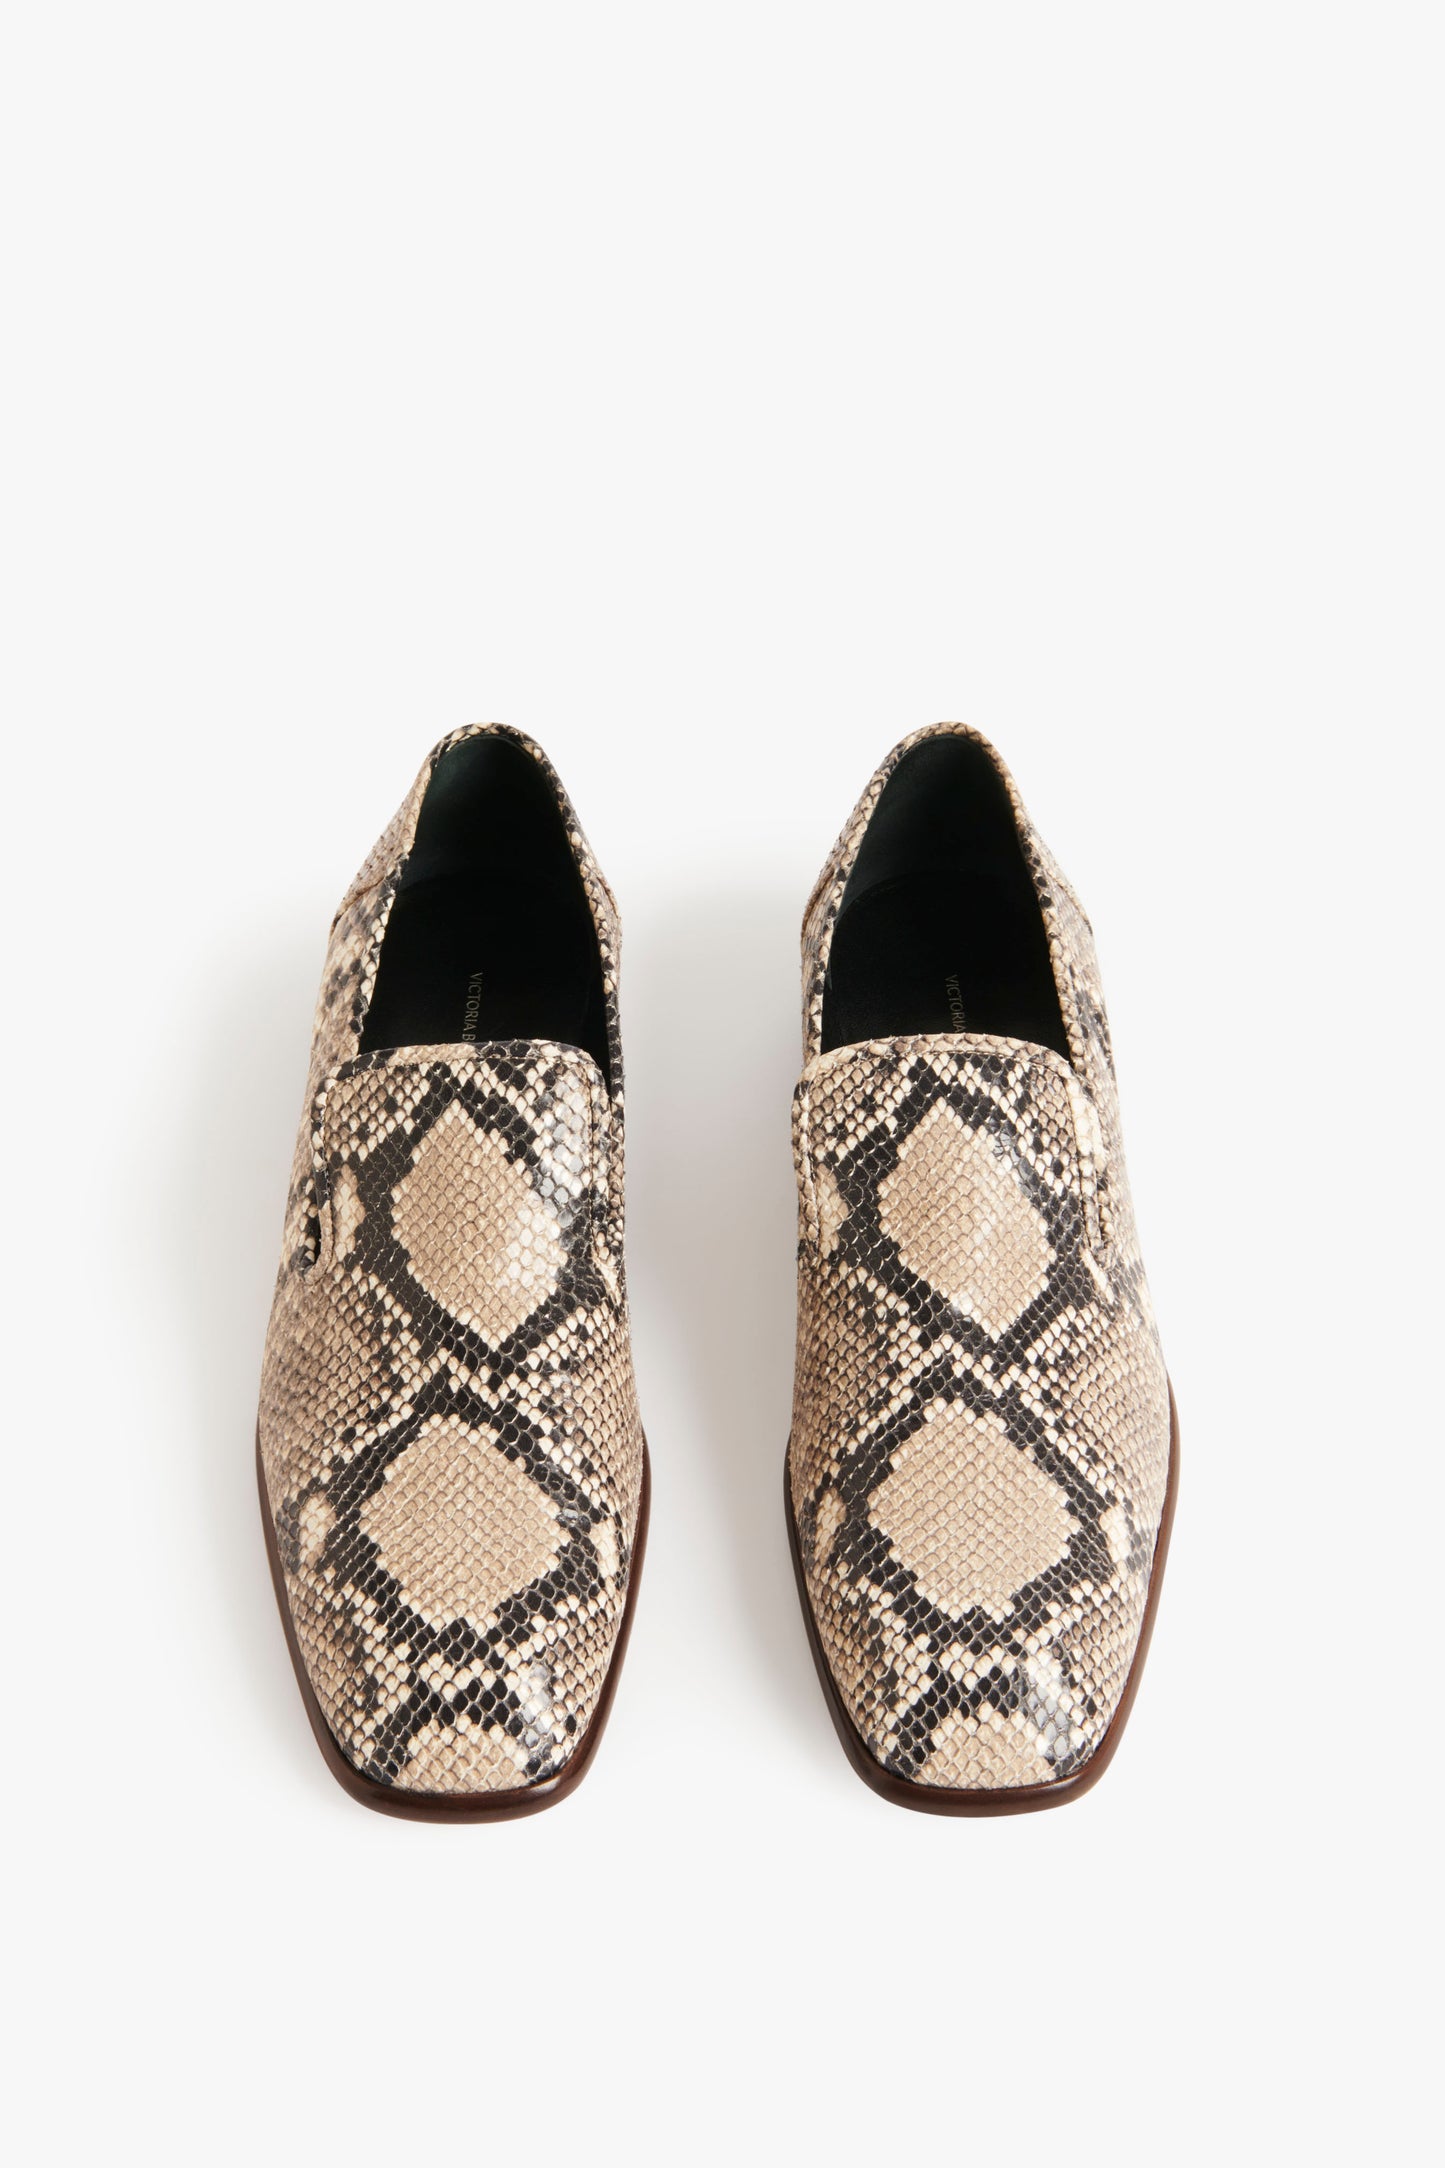 A pair of Victoria Beckham Hanna Loafer in Beige Snake Print slip-on shoes with a Beige Snake Print leather finish and geometric pattern, featuring black, beige, and brown tones, displayed against a white background.